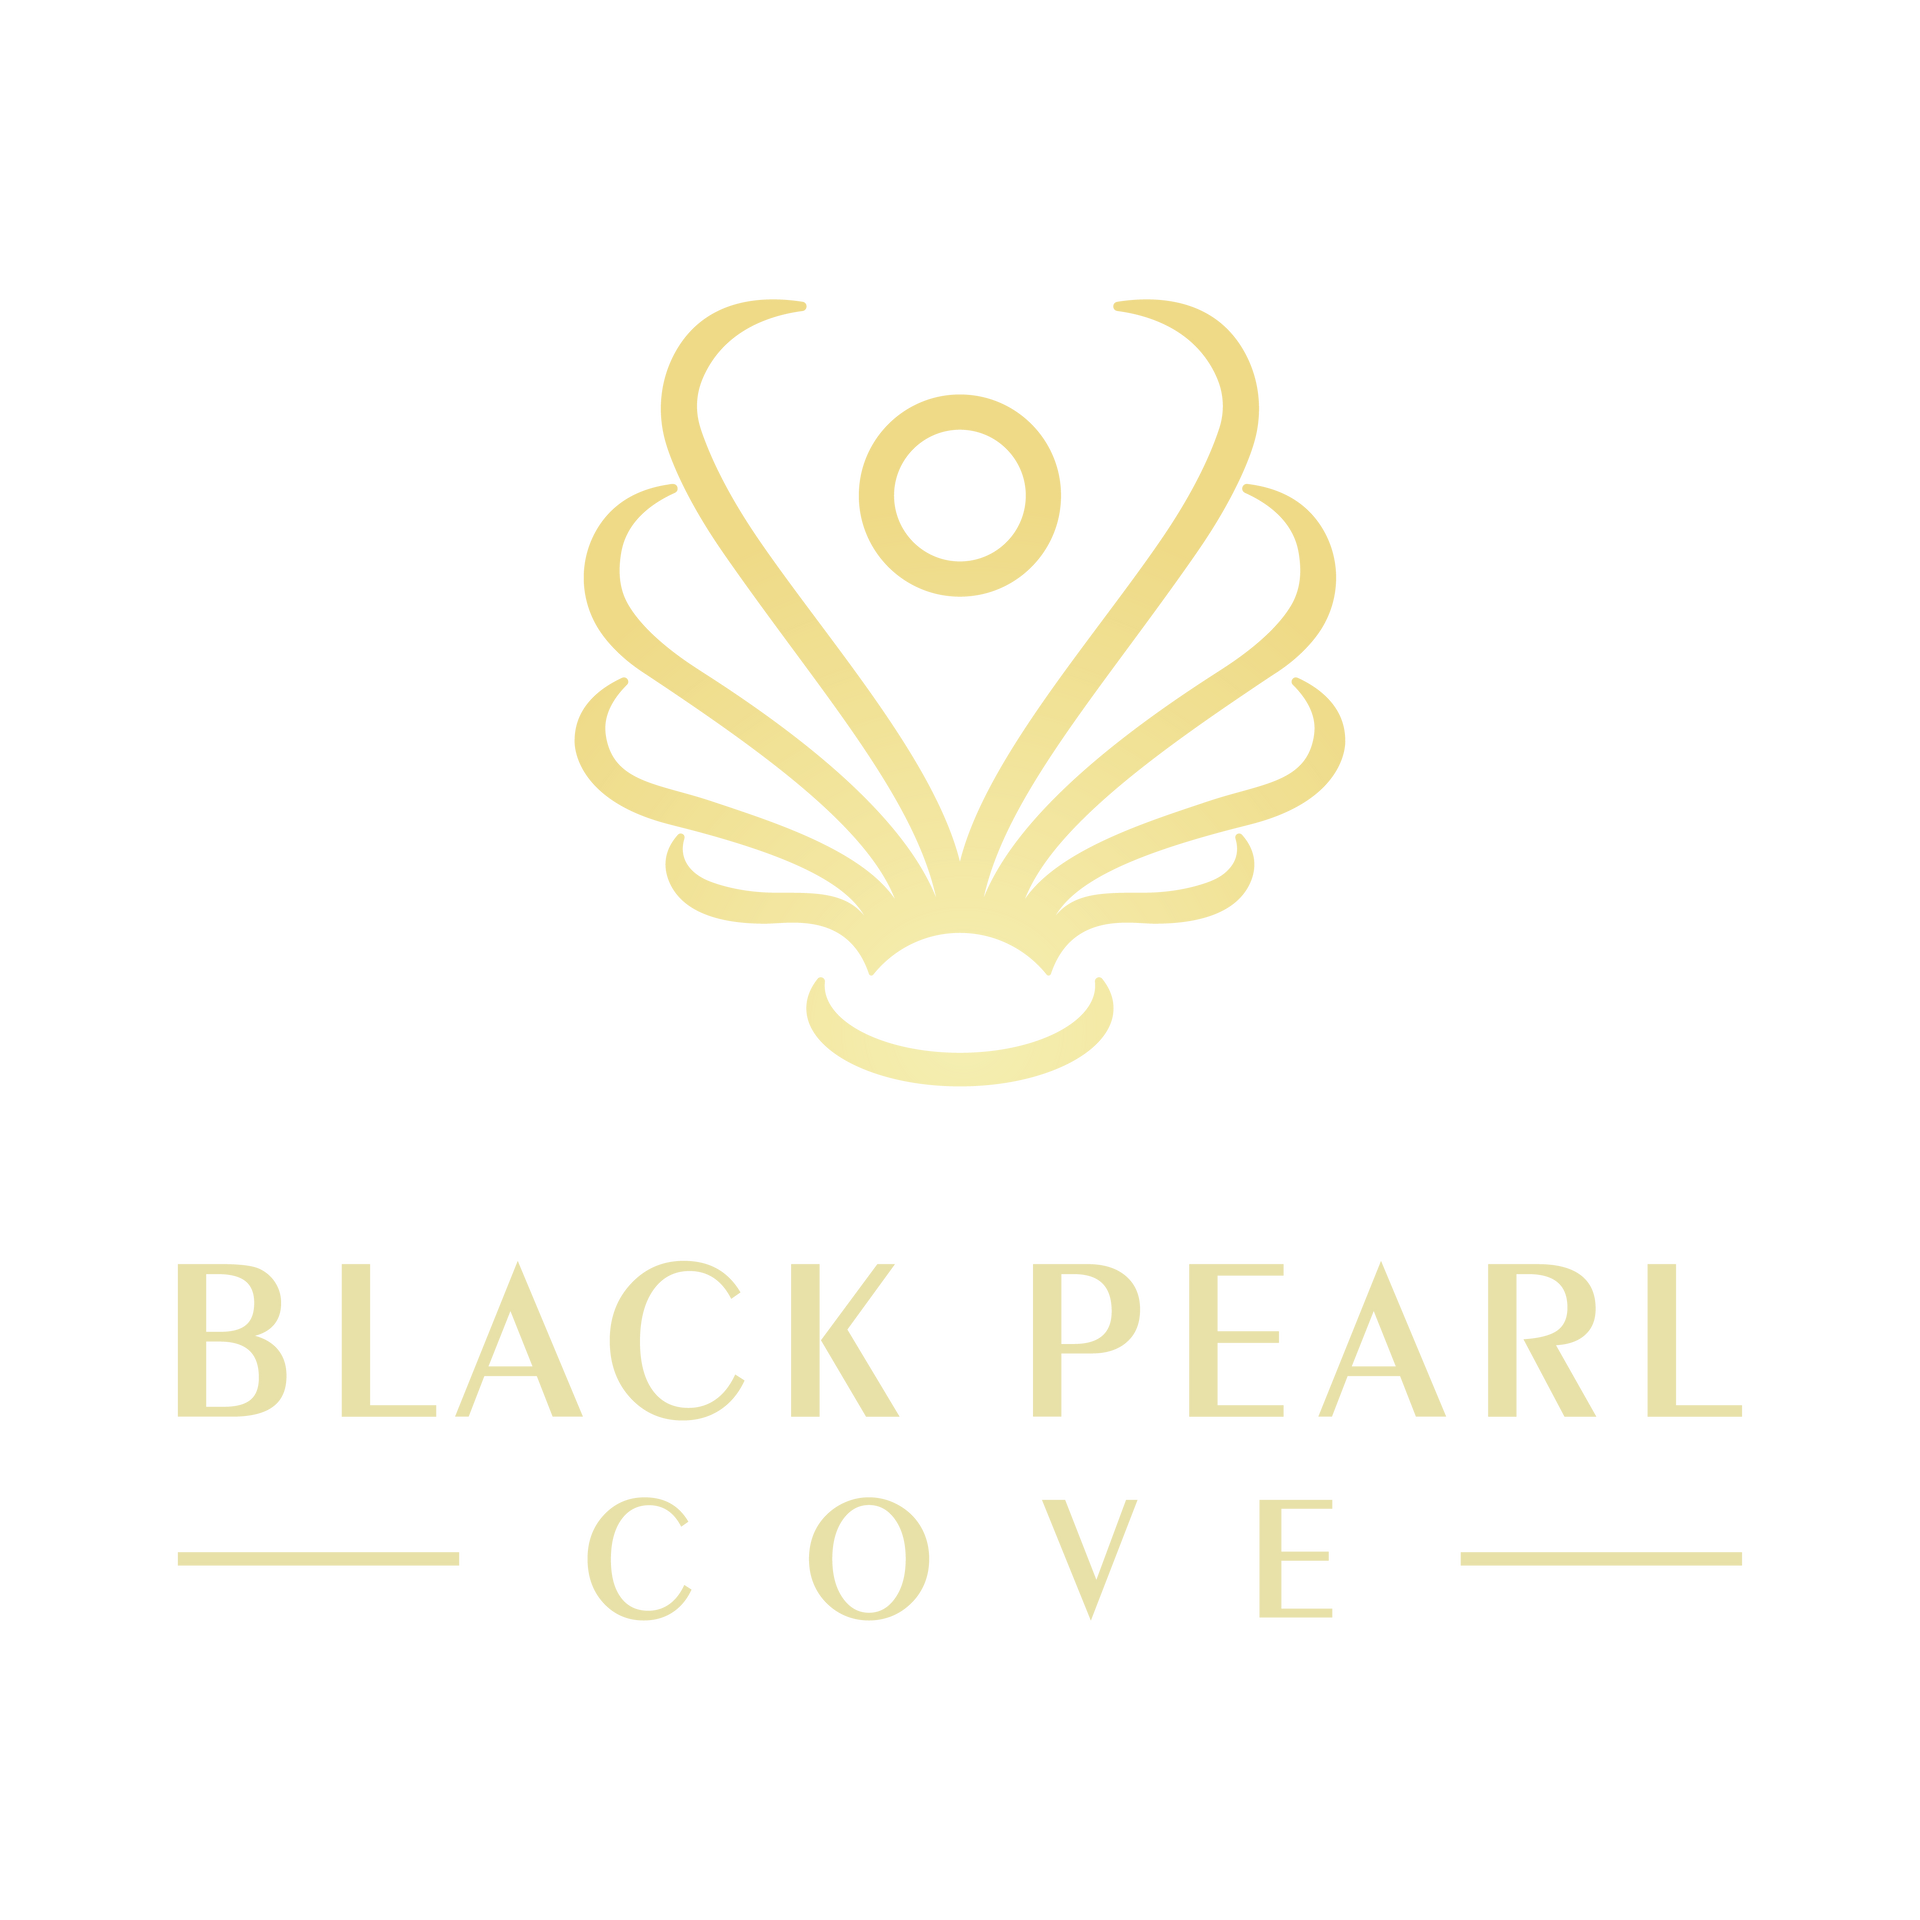 The logo for black pearl cove is a shell with a circle in the middle.